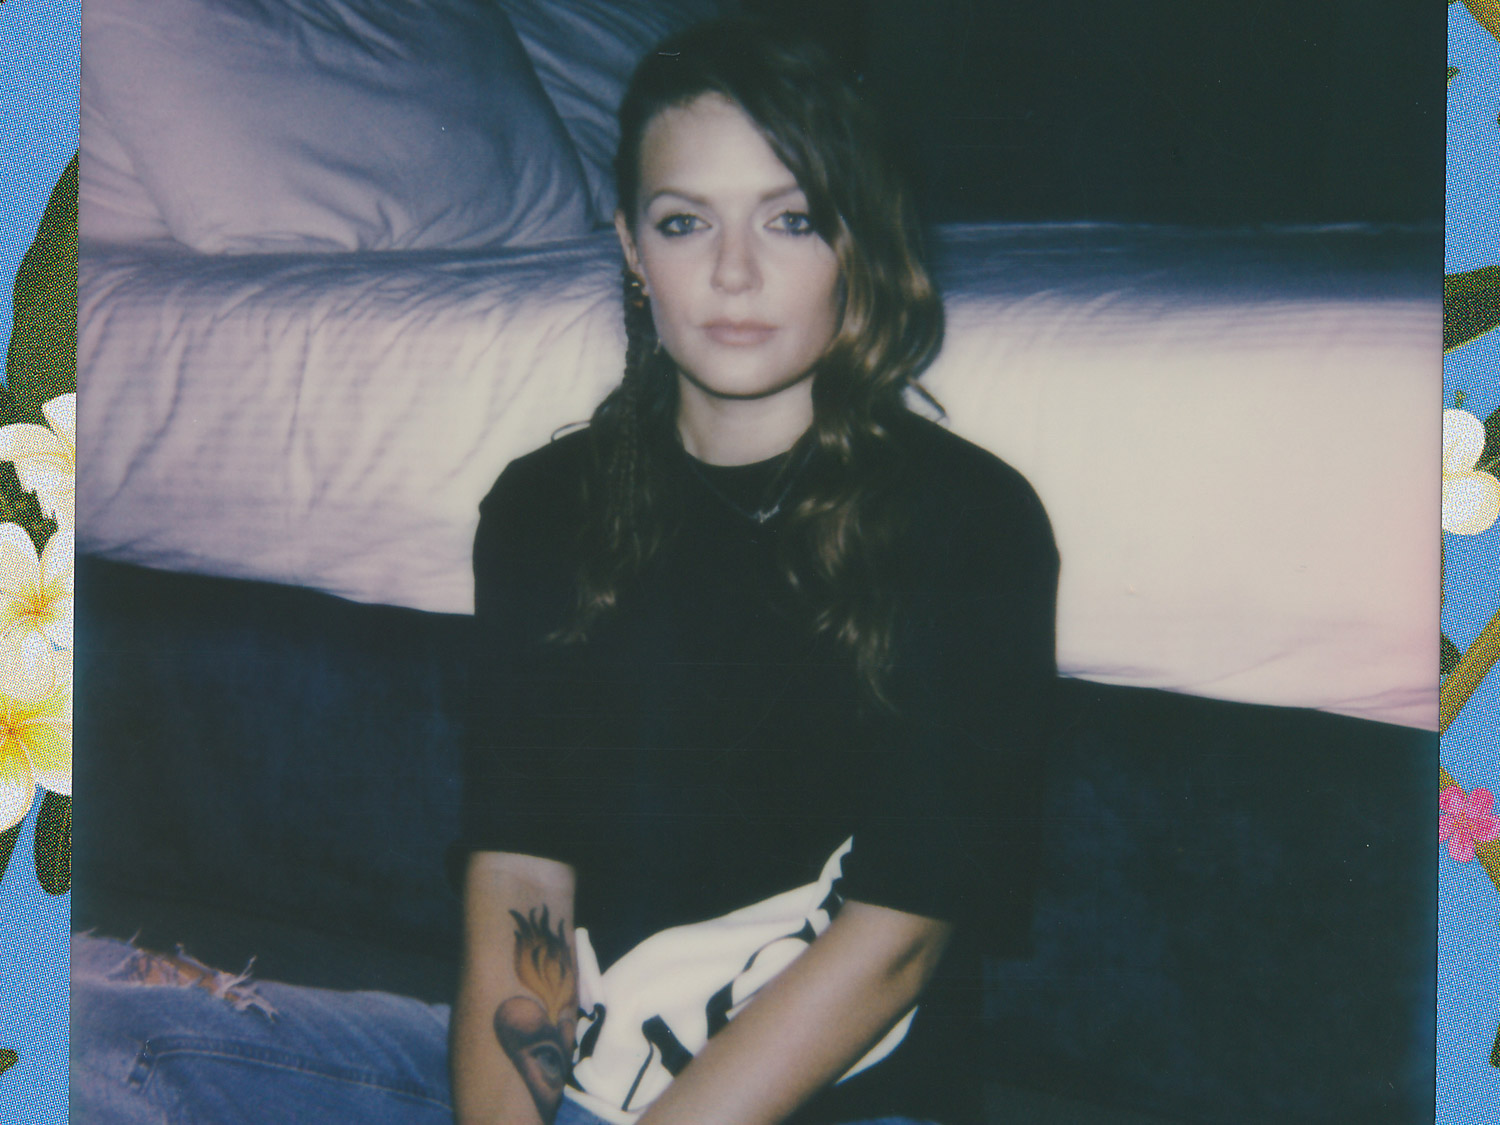 Tove Lo ponders on her move from songwriter to popstar